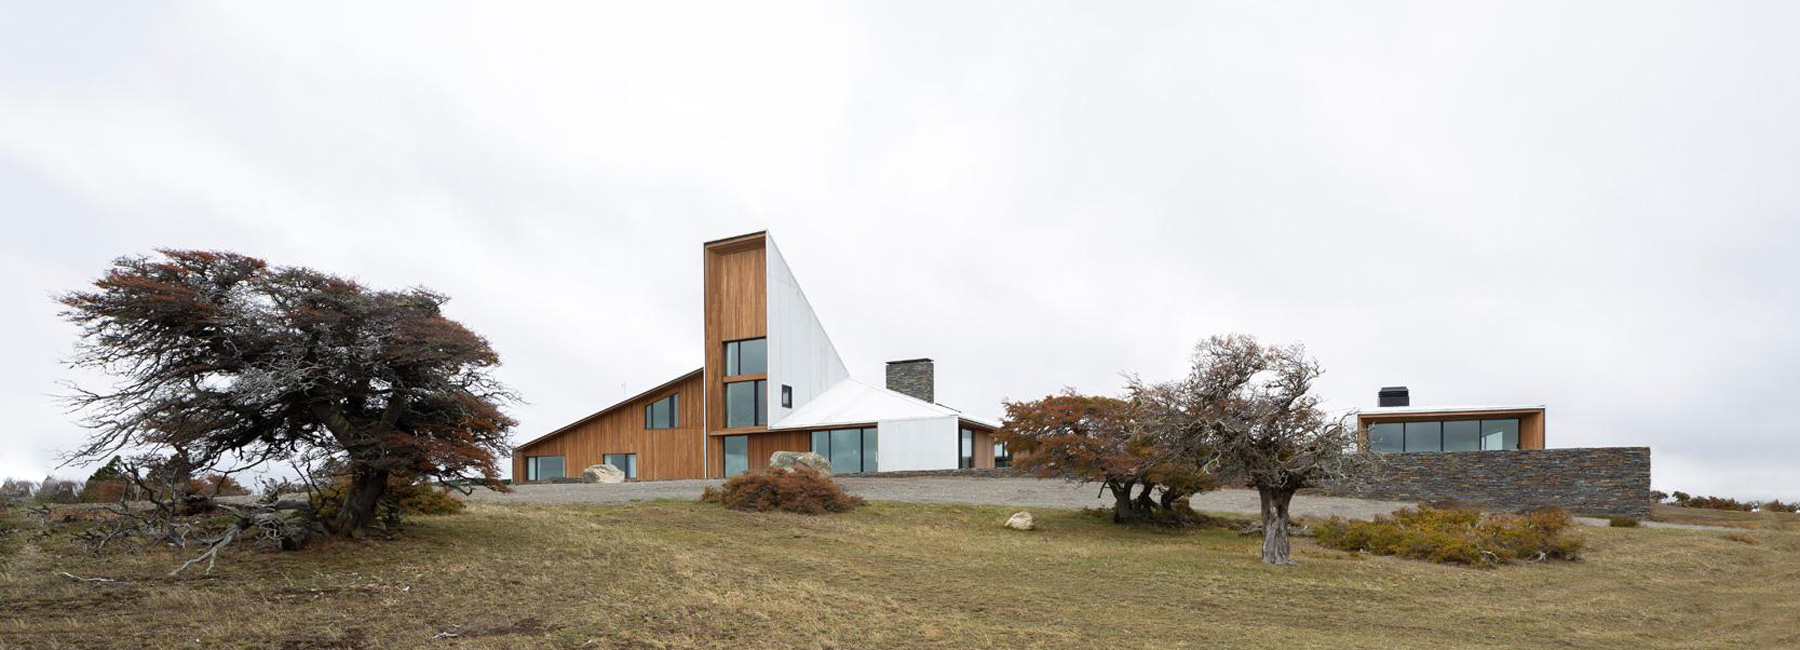 richter dahl rocha & associés renovates + expands morro chico ranch in argentinian patagonia